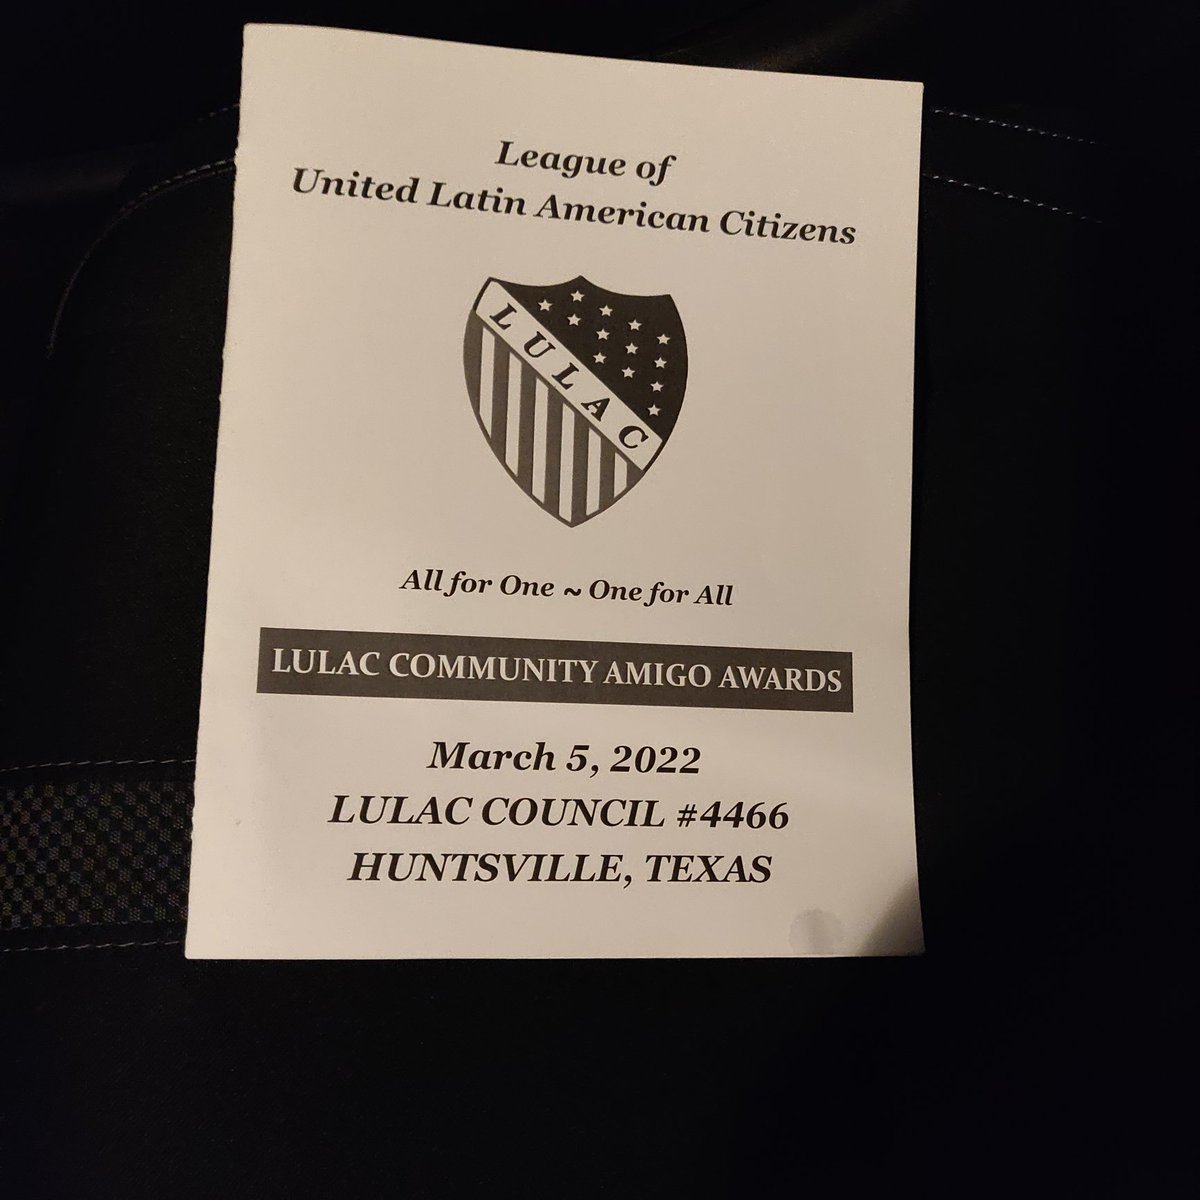 Congratulations to Huntsville Intermediate School Teacher & Coach Mr. Juan Torres. Saturday he was recognized by LULAC for Educator of the Year! #BUILDINGCHAMPIONS #HISDHORNETS #HORNETIMPACT #STINGEM #TODAYISTHEDAY #TURNTHETIDE #TAKINGITTOTHENEXTLEVEL #POINTOFLIGHT